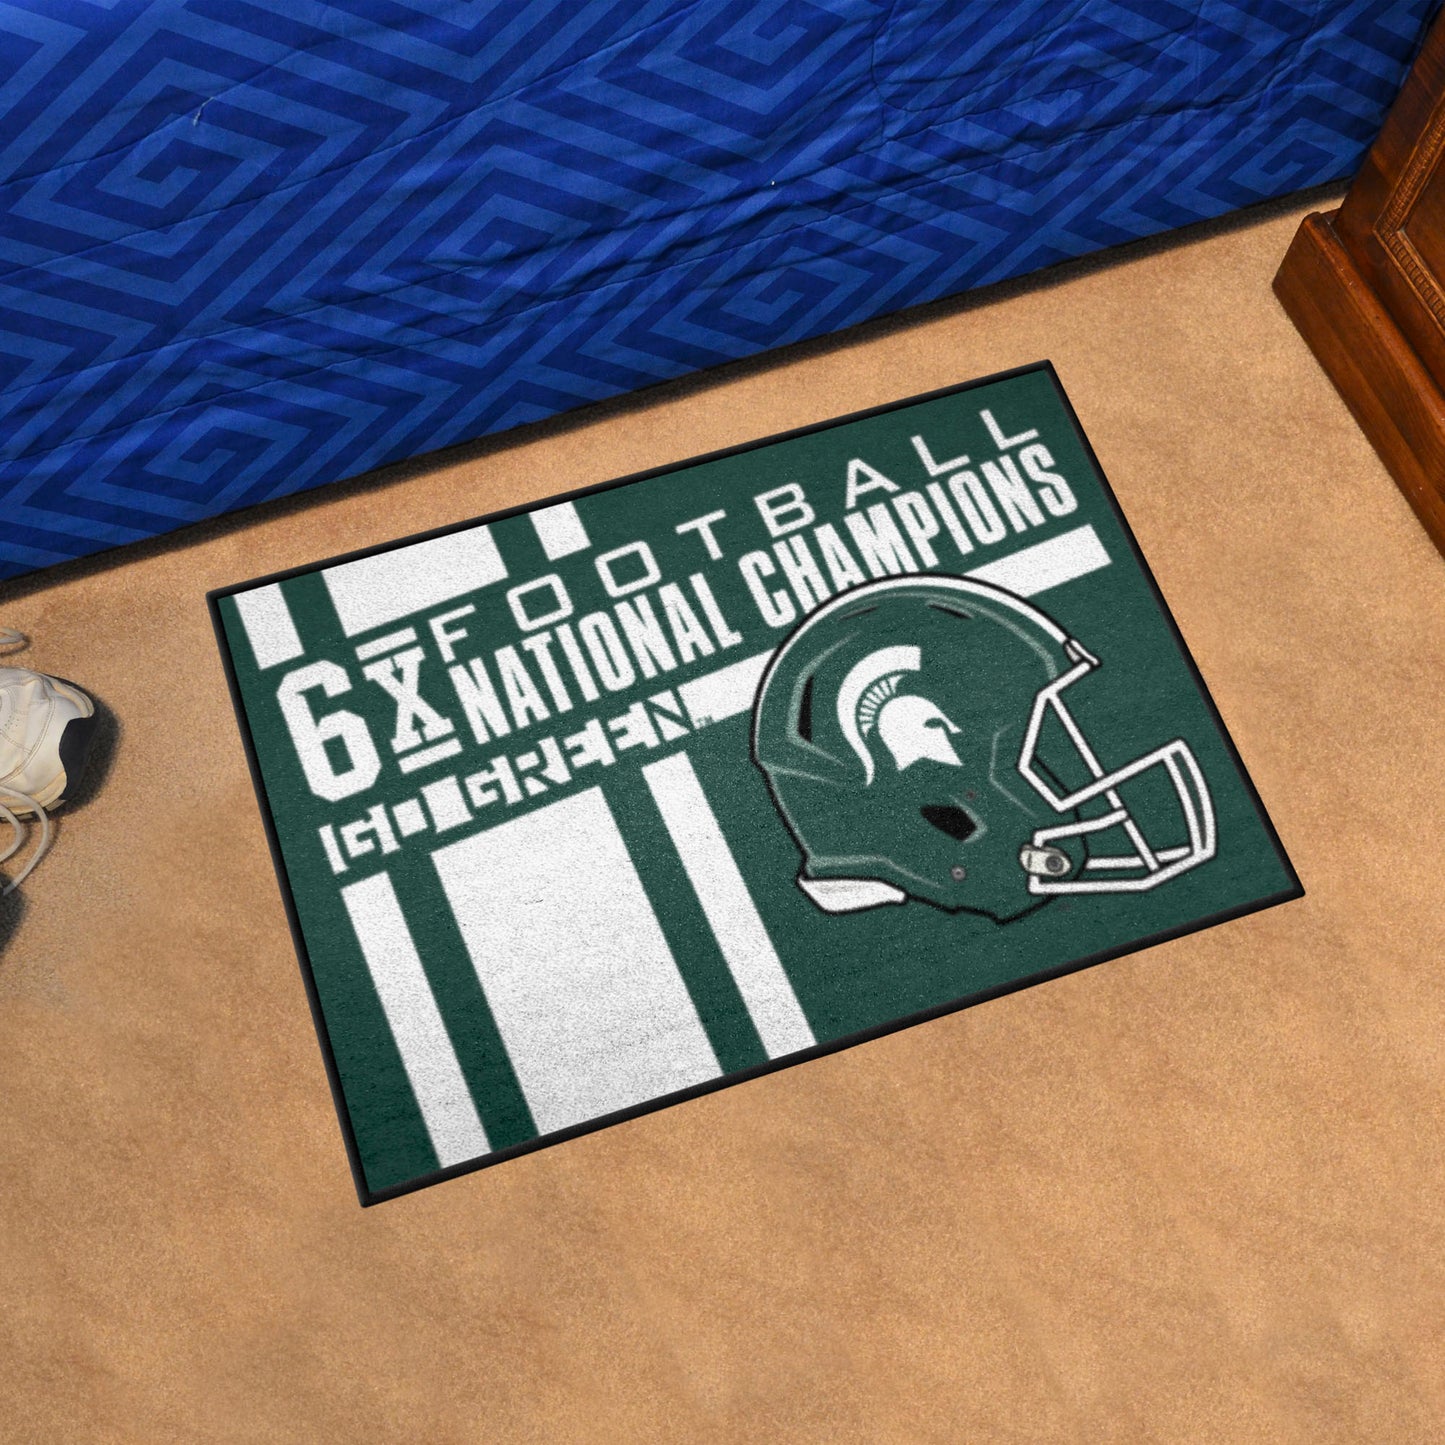 Michigan State Spartans Dynasty Starter Mat Accent Rug - 19in. x 30in. - Basketball Champions